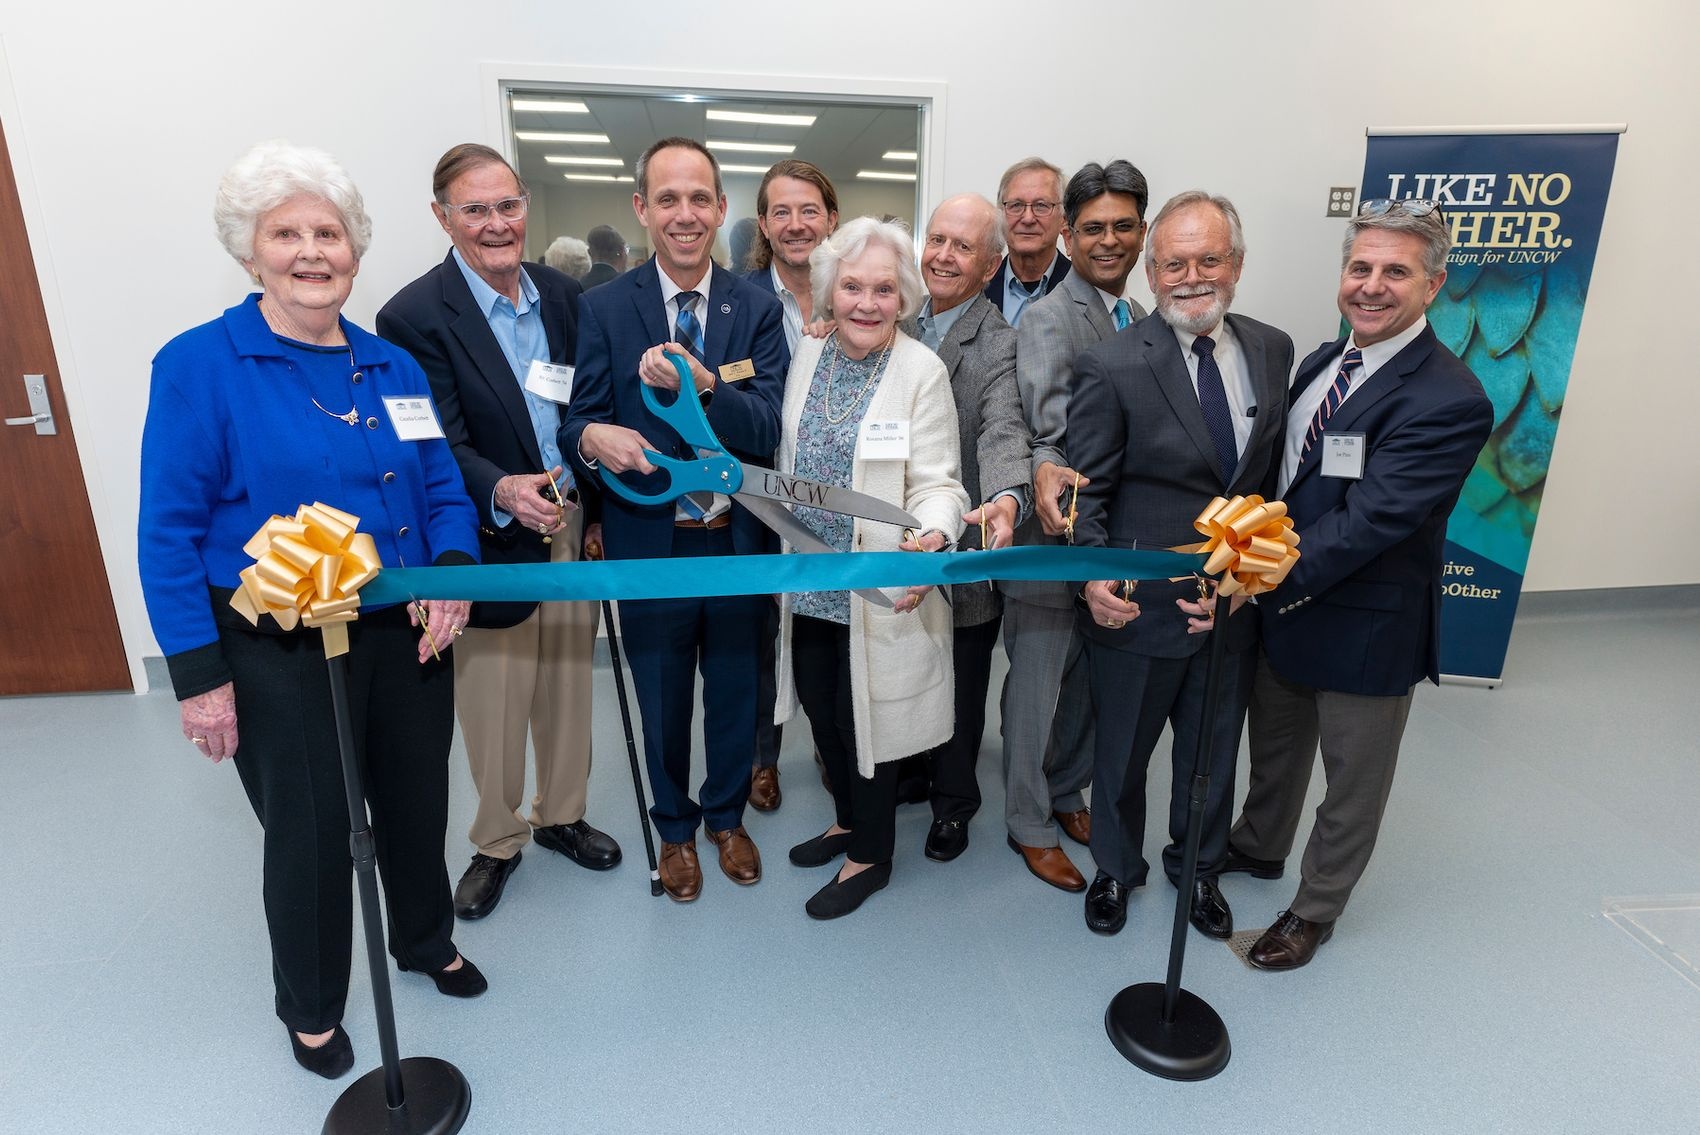 Chancellor Aswani Volety, College of Health and Human Services Dean Jack C. Watson, members of the Corbett family and community leaders celebrated the completion of the Dr. J. Richard “Dick” Corbett Anatomy Laboratory with a ribbon cutting ceremony on Feb. 21. 